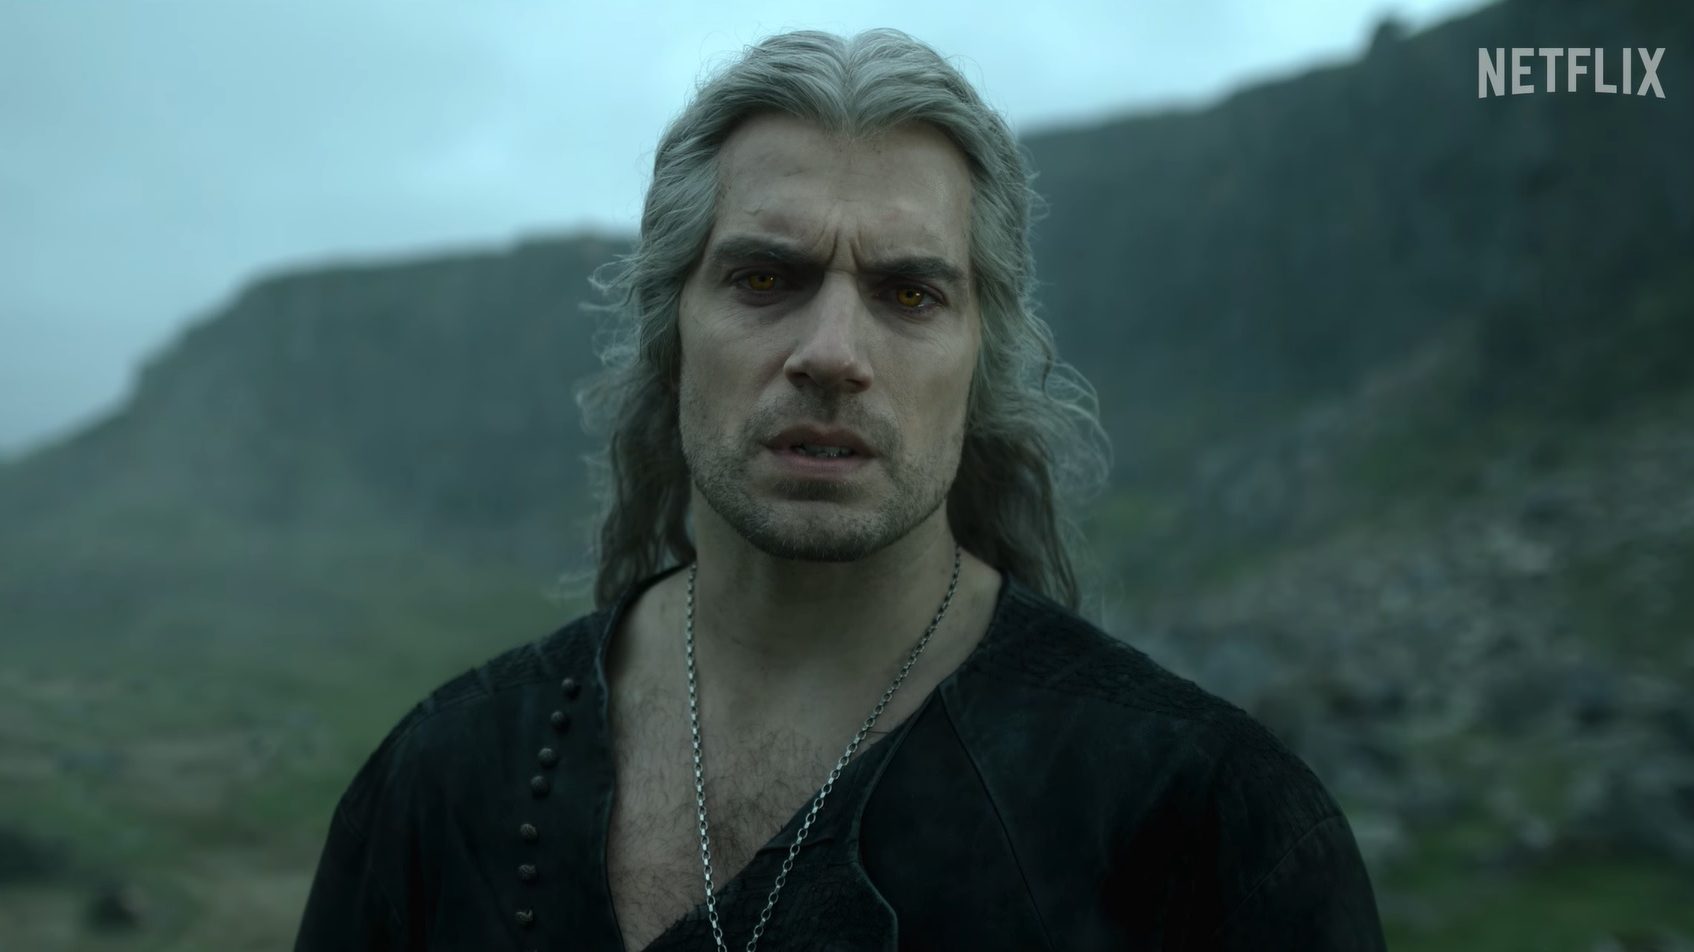 The Witcher Season 3 on Netflix finally has its first teaser